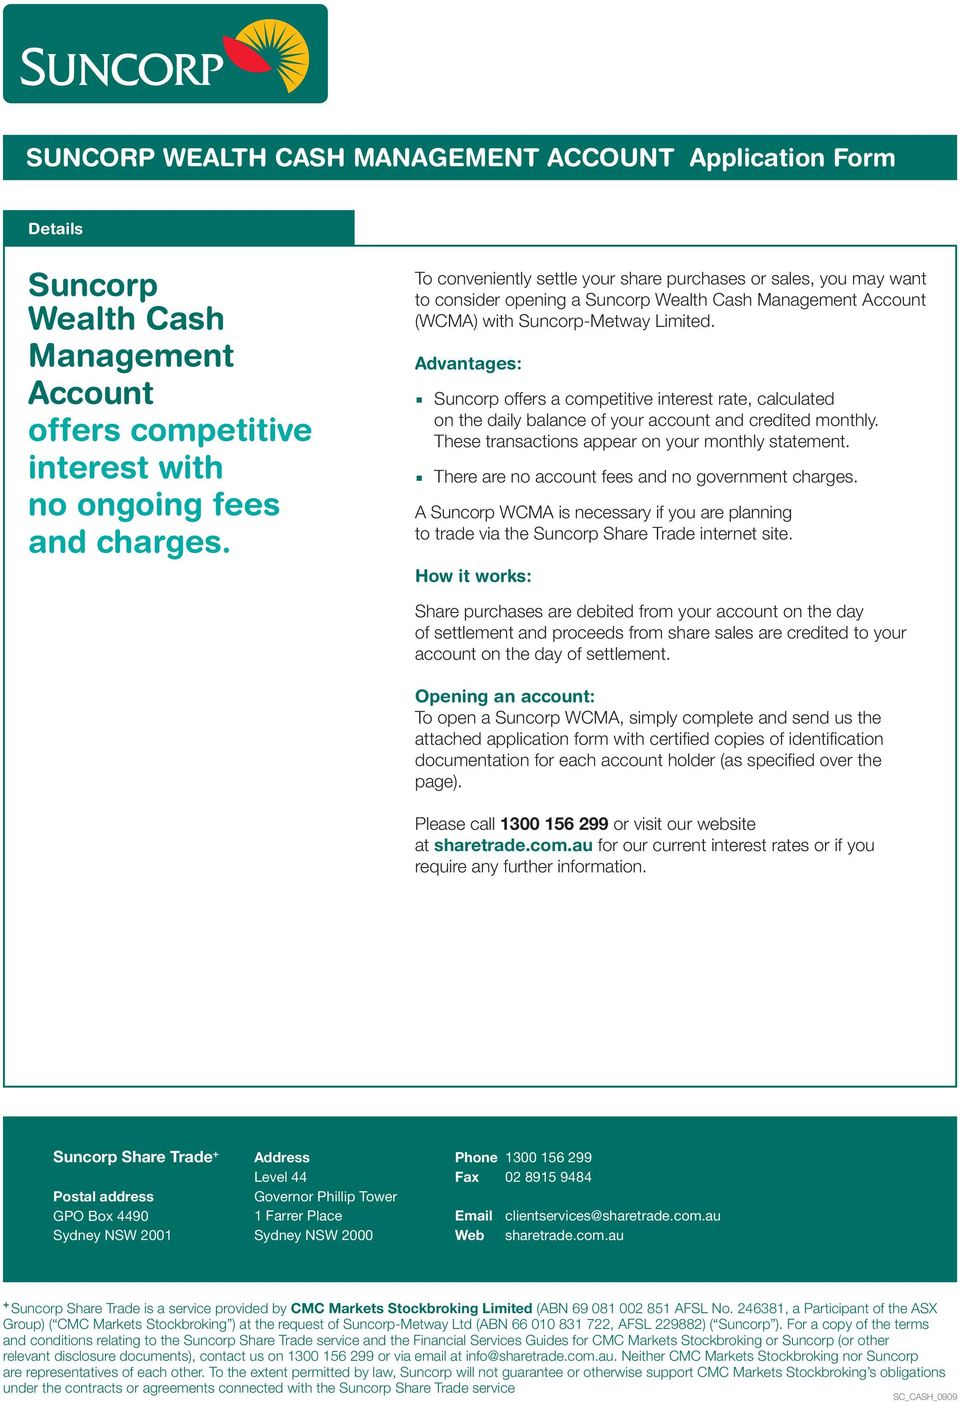 Advantages: Suncorp offers a competitive interest rate, calculated on the daily balance of your account and credited monthly. These transactions appear on your monthly statement.